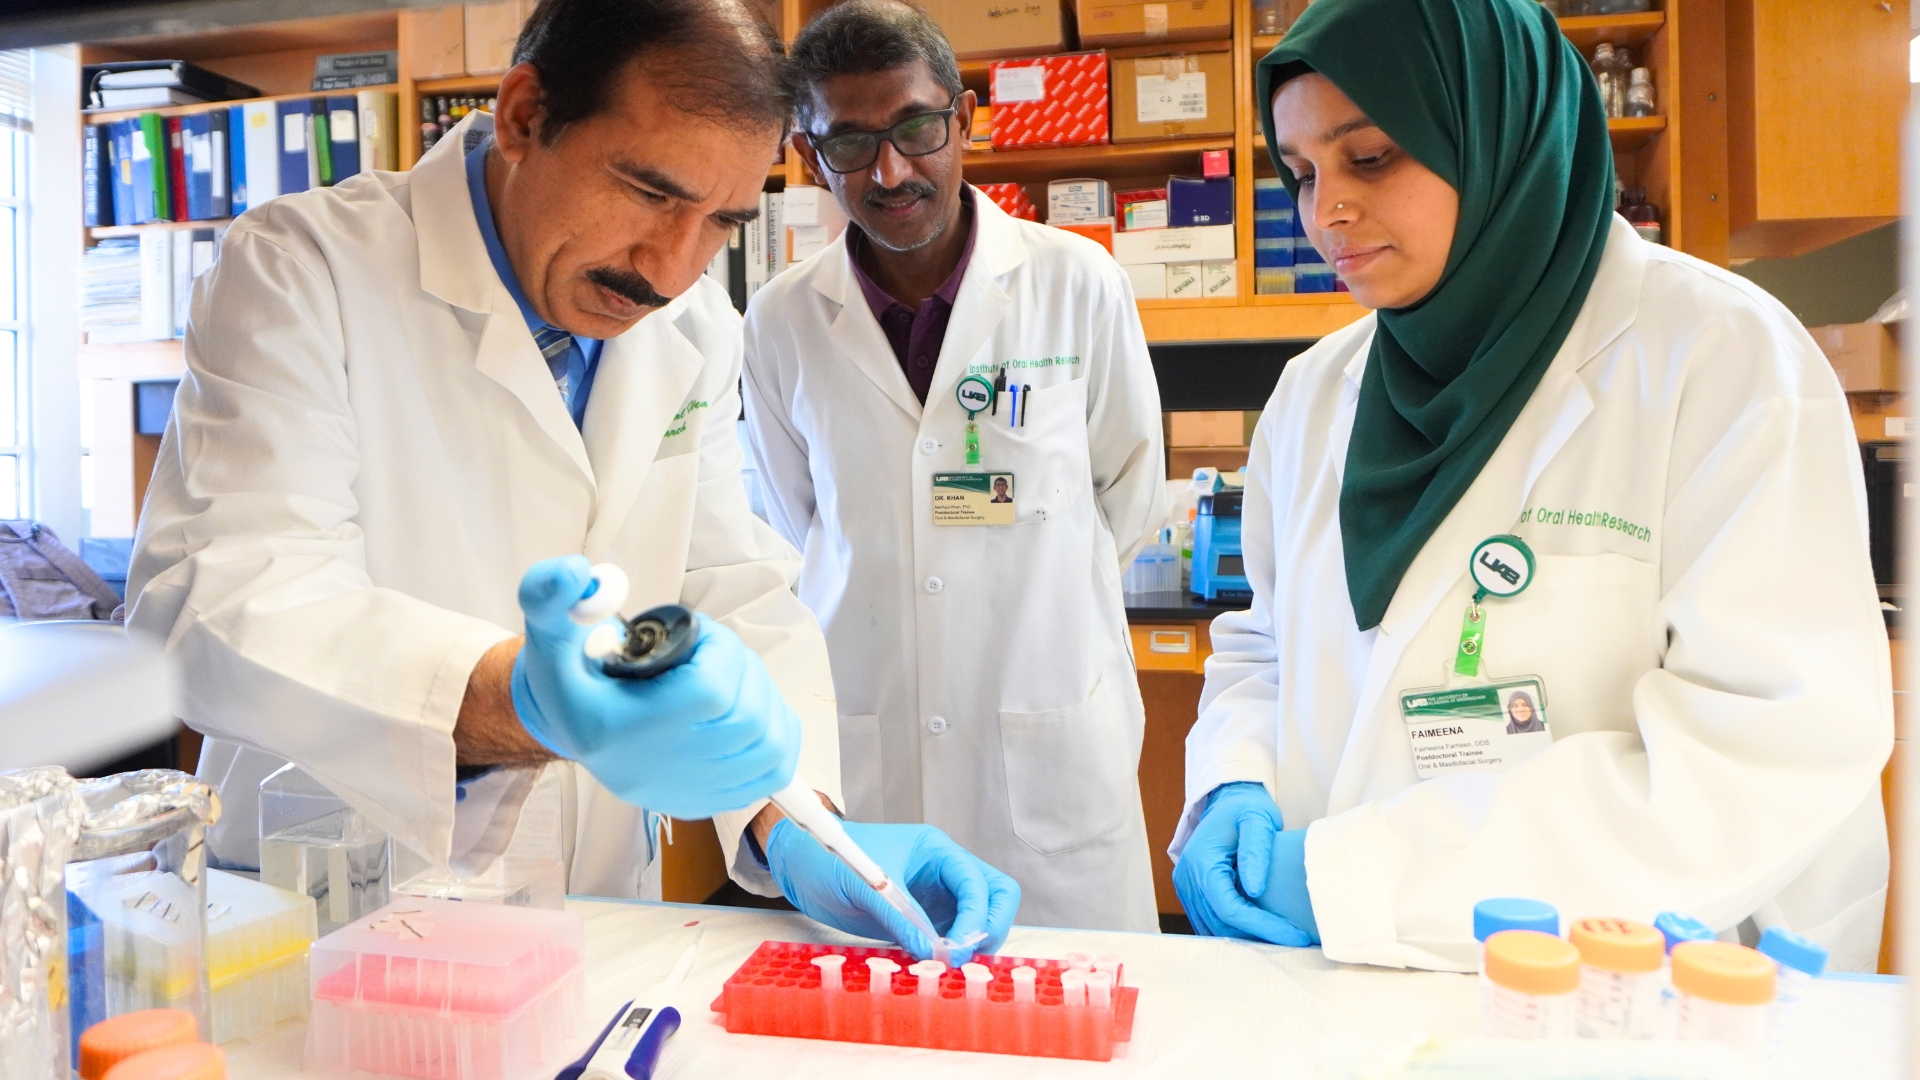 Dr. Javed working with students in lab